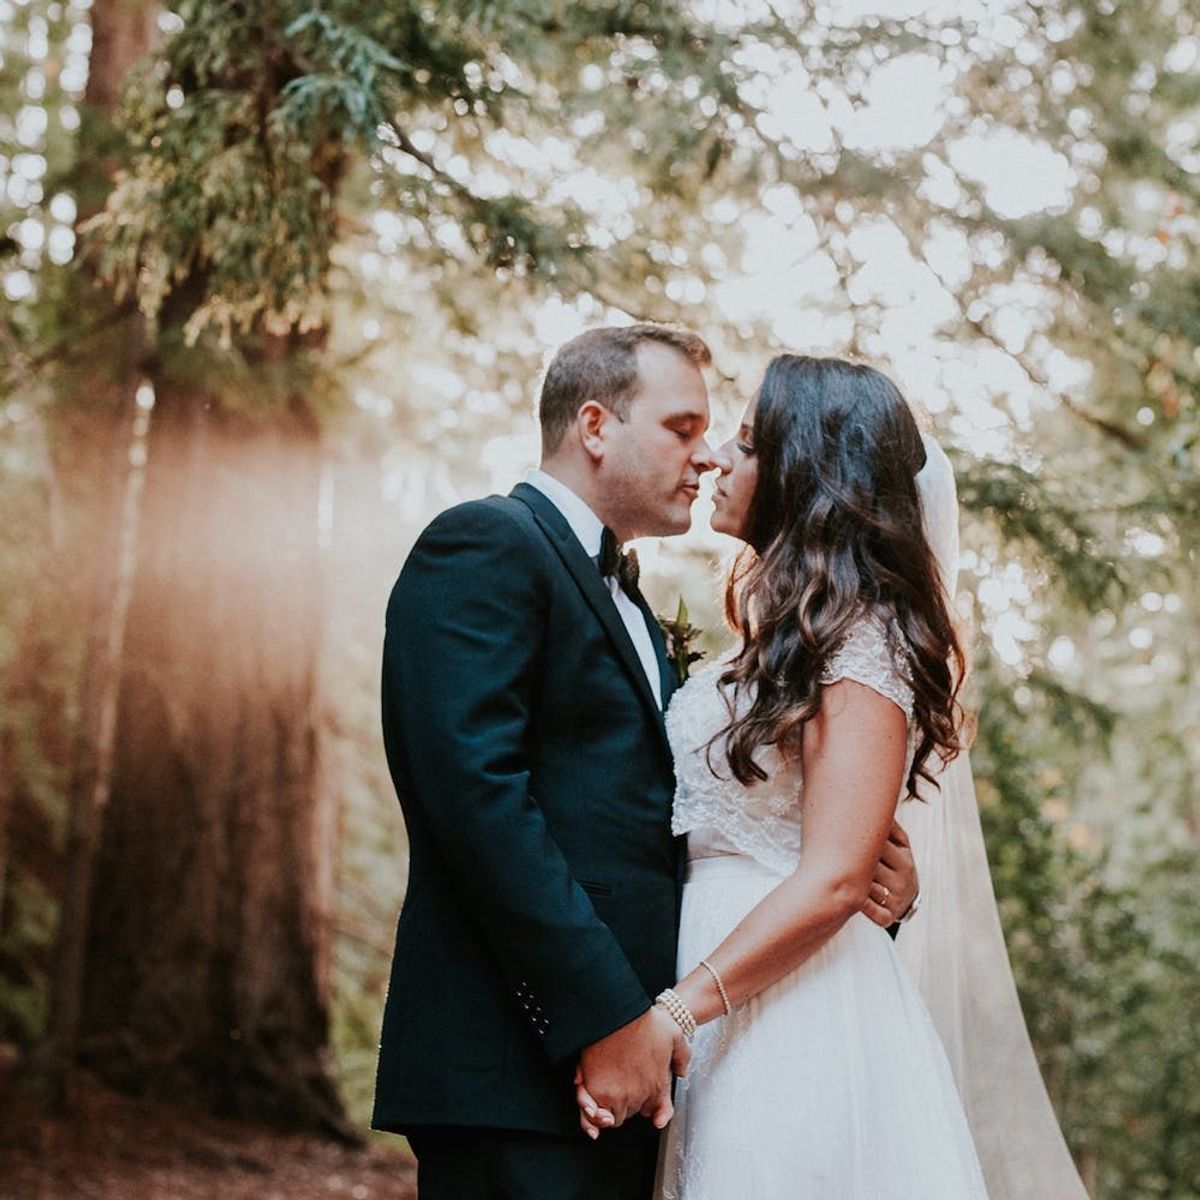 This Woodland-Chic Wedding Is Straight Out of a Fairy Tale